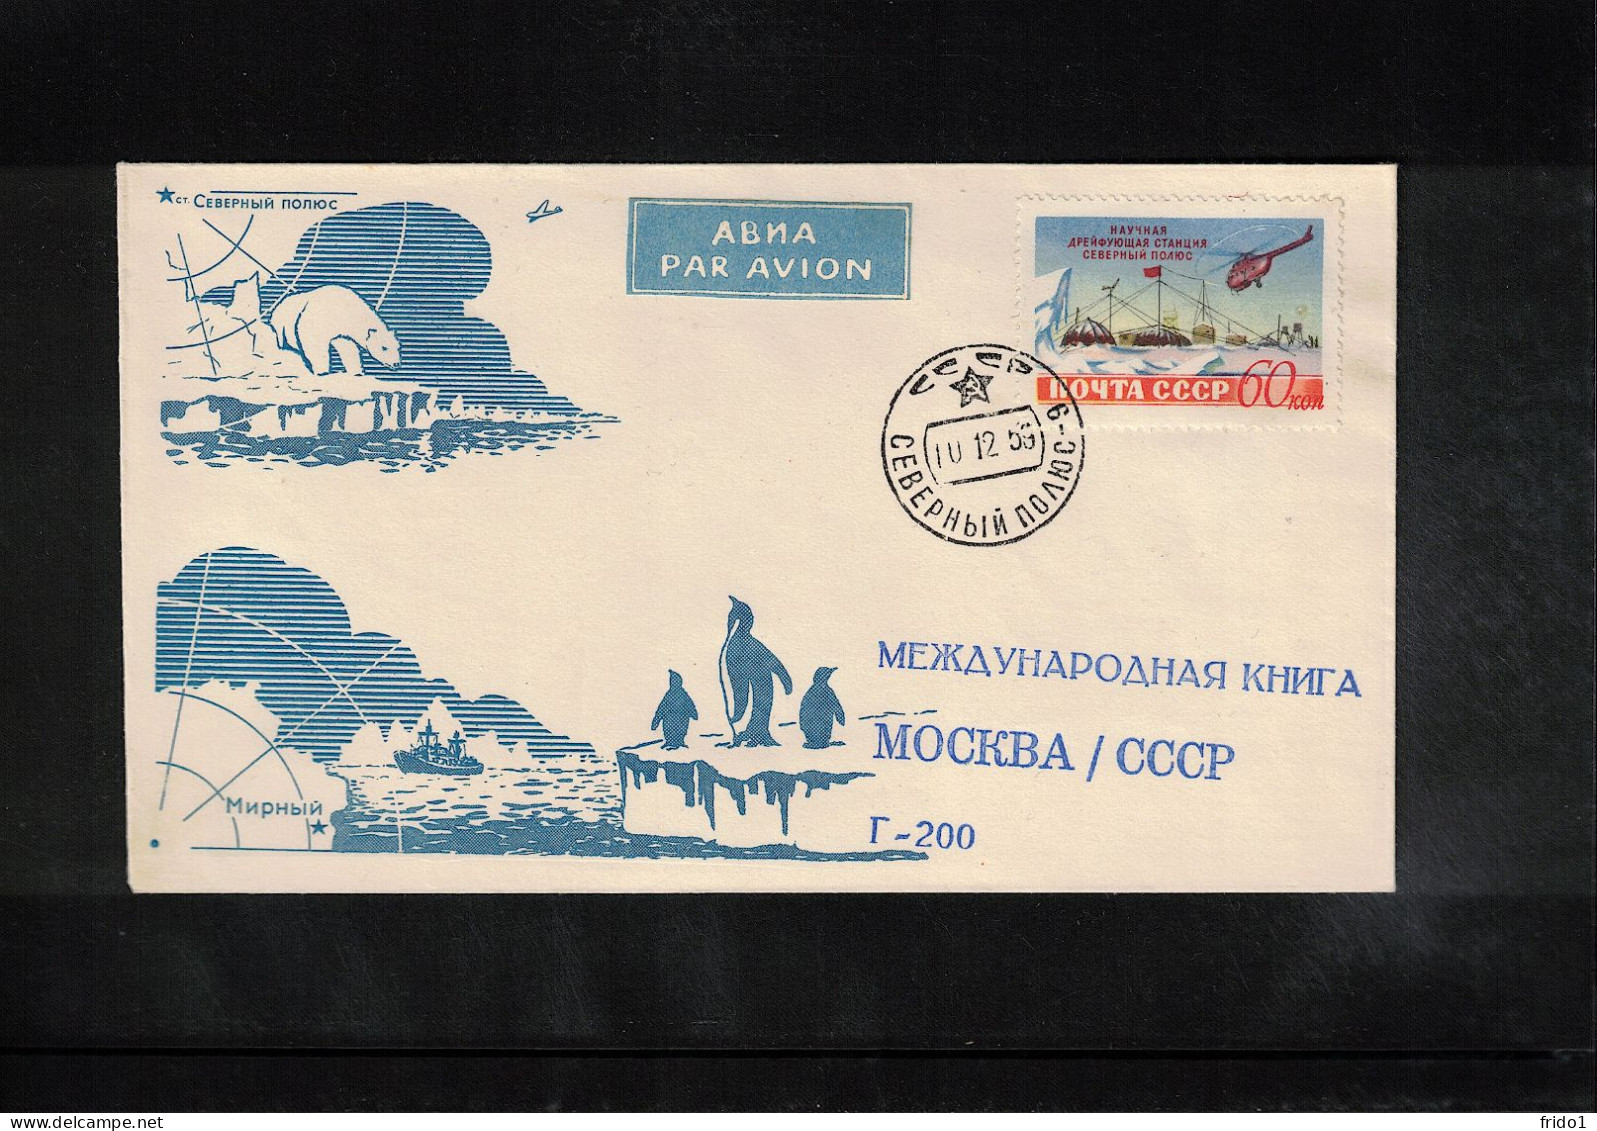 Russia USSR 1959 North Pole Station Sewernyi Poljus Interesting Cover - Scientific Stations & Arctic Drifting Stations